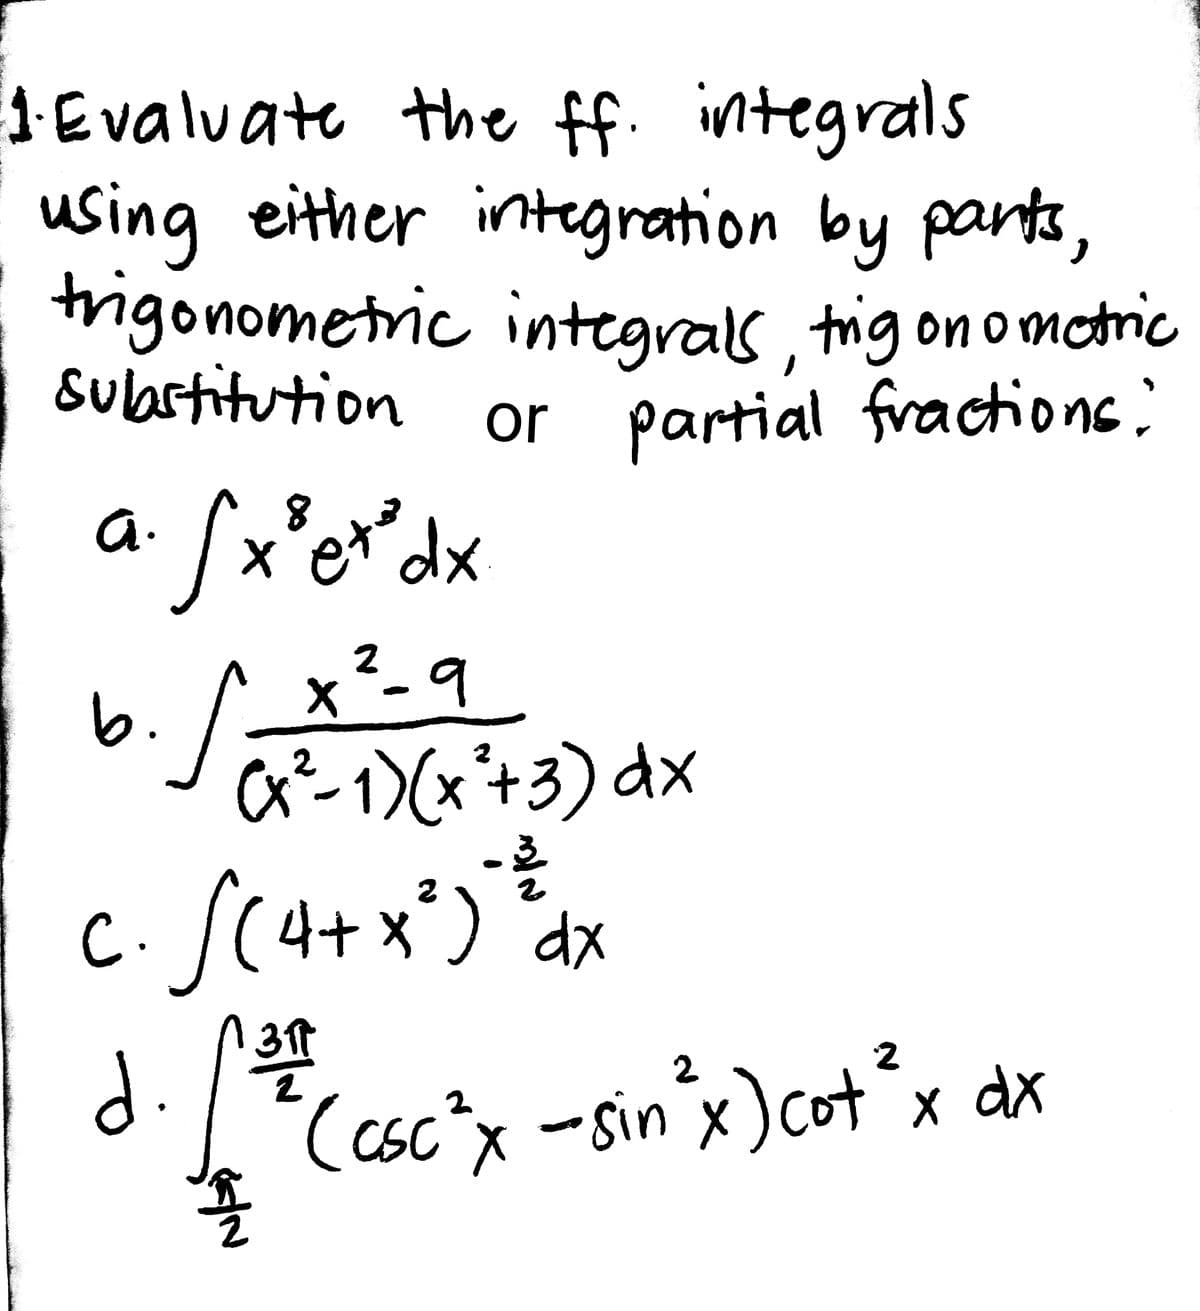 JEvaluate the ff. integrals
using either integration by parts,
trigonometric integrals trig on omotric
Subastitution
1
or partial fractions:
a.
x²-9
b.
a²-1)(x+3) dx
2.
C. S(4+x*) *ax
2
d.
(csc^x -sin'x)cot°x dx
2
CSC X
sin x
